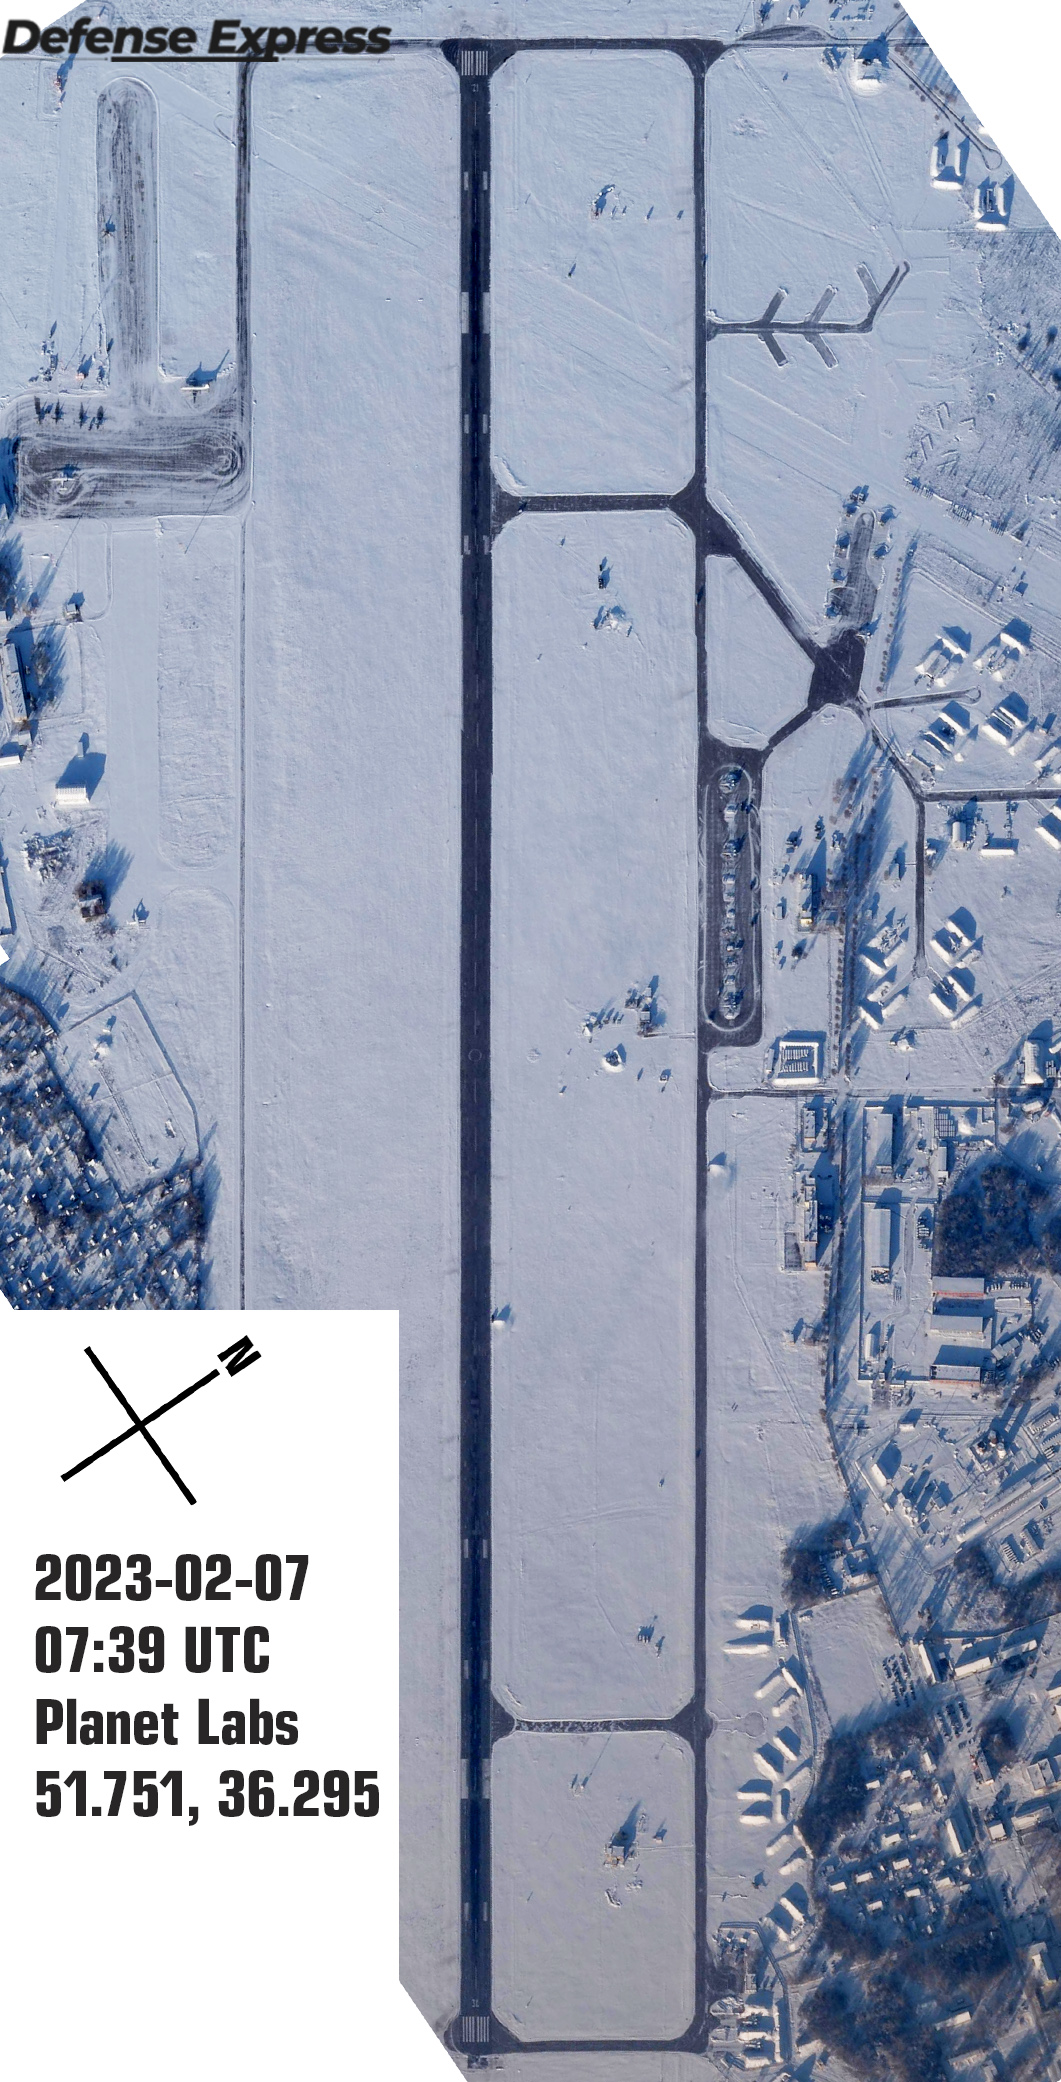 Satellite photo of the Kursk airbase from February 7th, 2023. Color correction applied